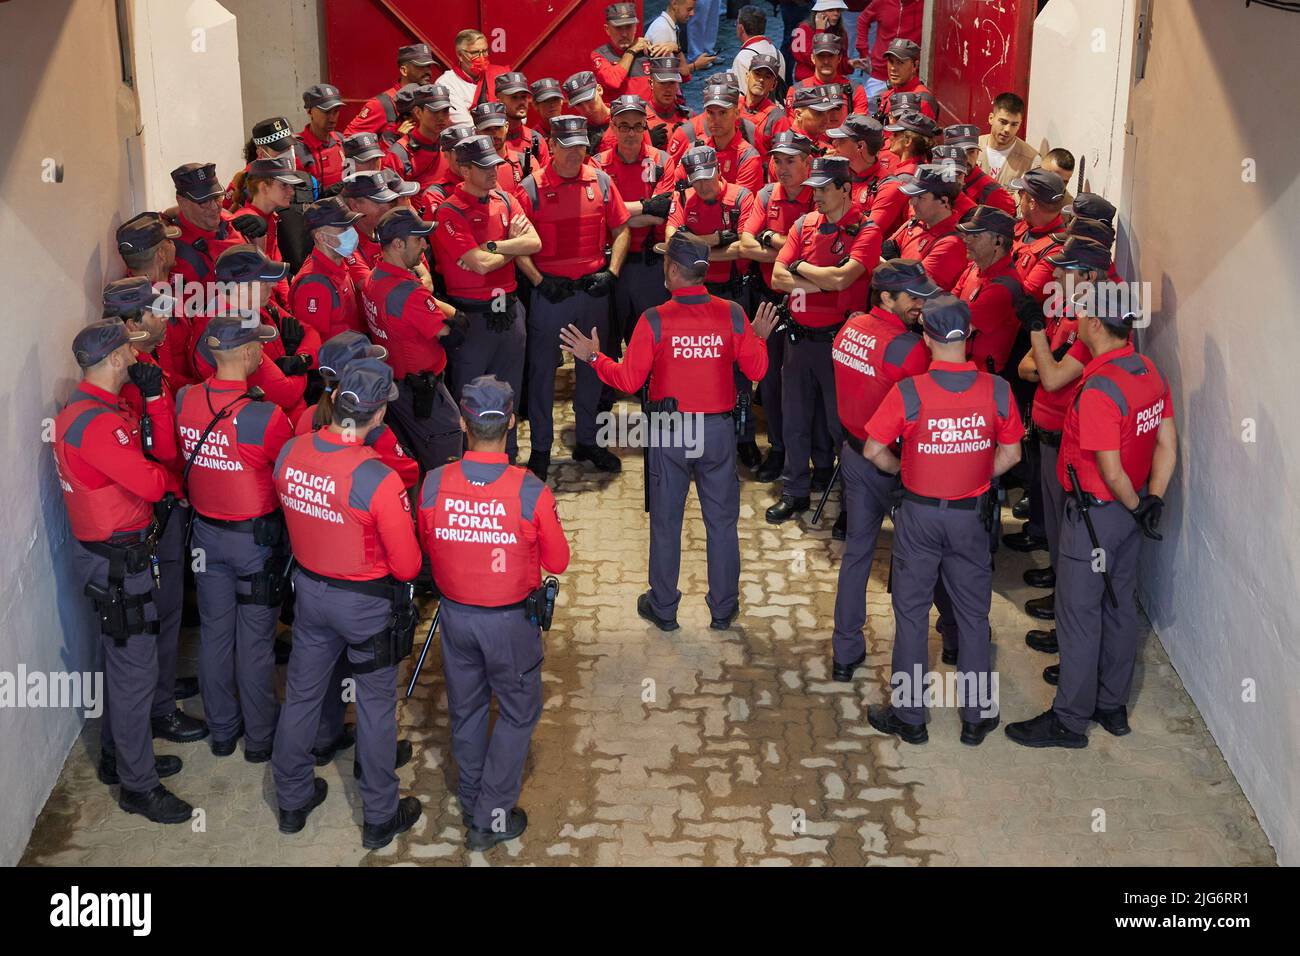 Navarre police during the second day of running of the bulls at the San Fermin Festival in Pamplona, northern Spain, on July 8, 2022. Revelers from all over the world flock to Pamplona every year to participate in the eight days of bullfighting. Made famous by American writer Ernest Hemmingway's 1926 novel 'The Sun Also Rises', the annual San Fermin Festival involves the daily running of the bulls through the historic heart of Pamplona to the bullring  (Photo by Ruben Albarran / PRESSINPHOTO) Stock Photo